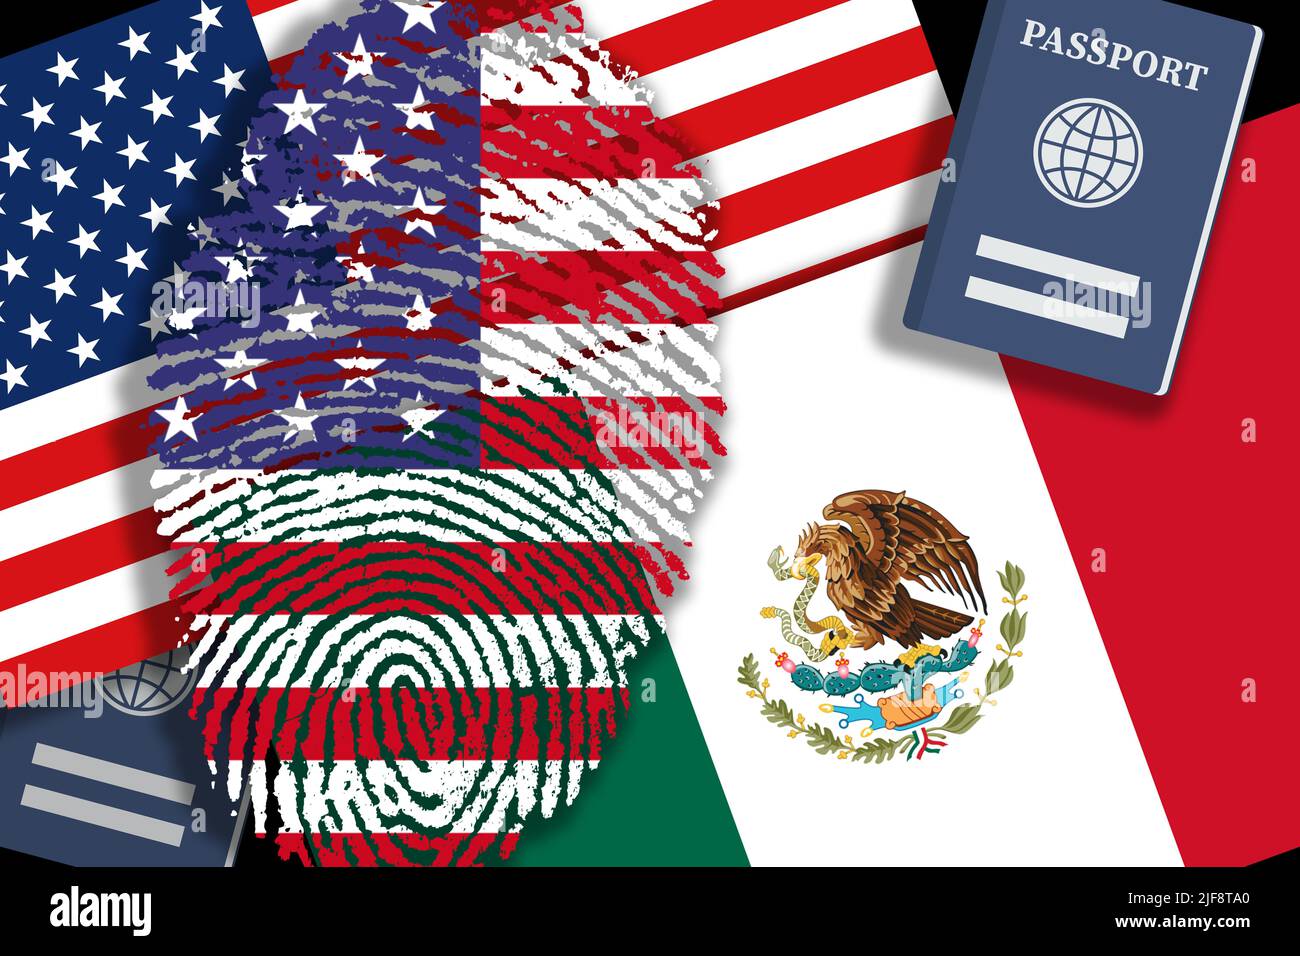 Migration / Immigration: US and Mexican flags and passports Stock Photo